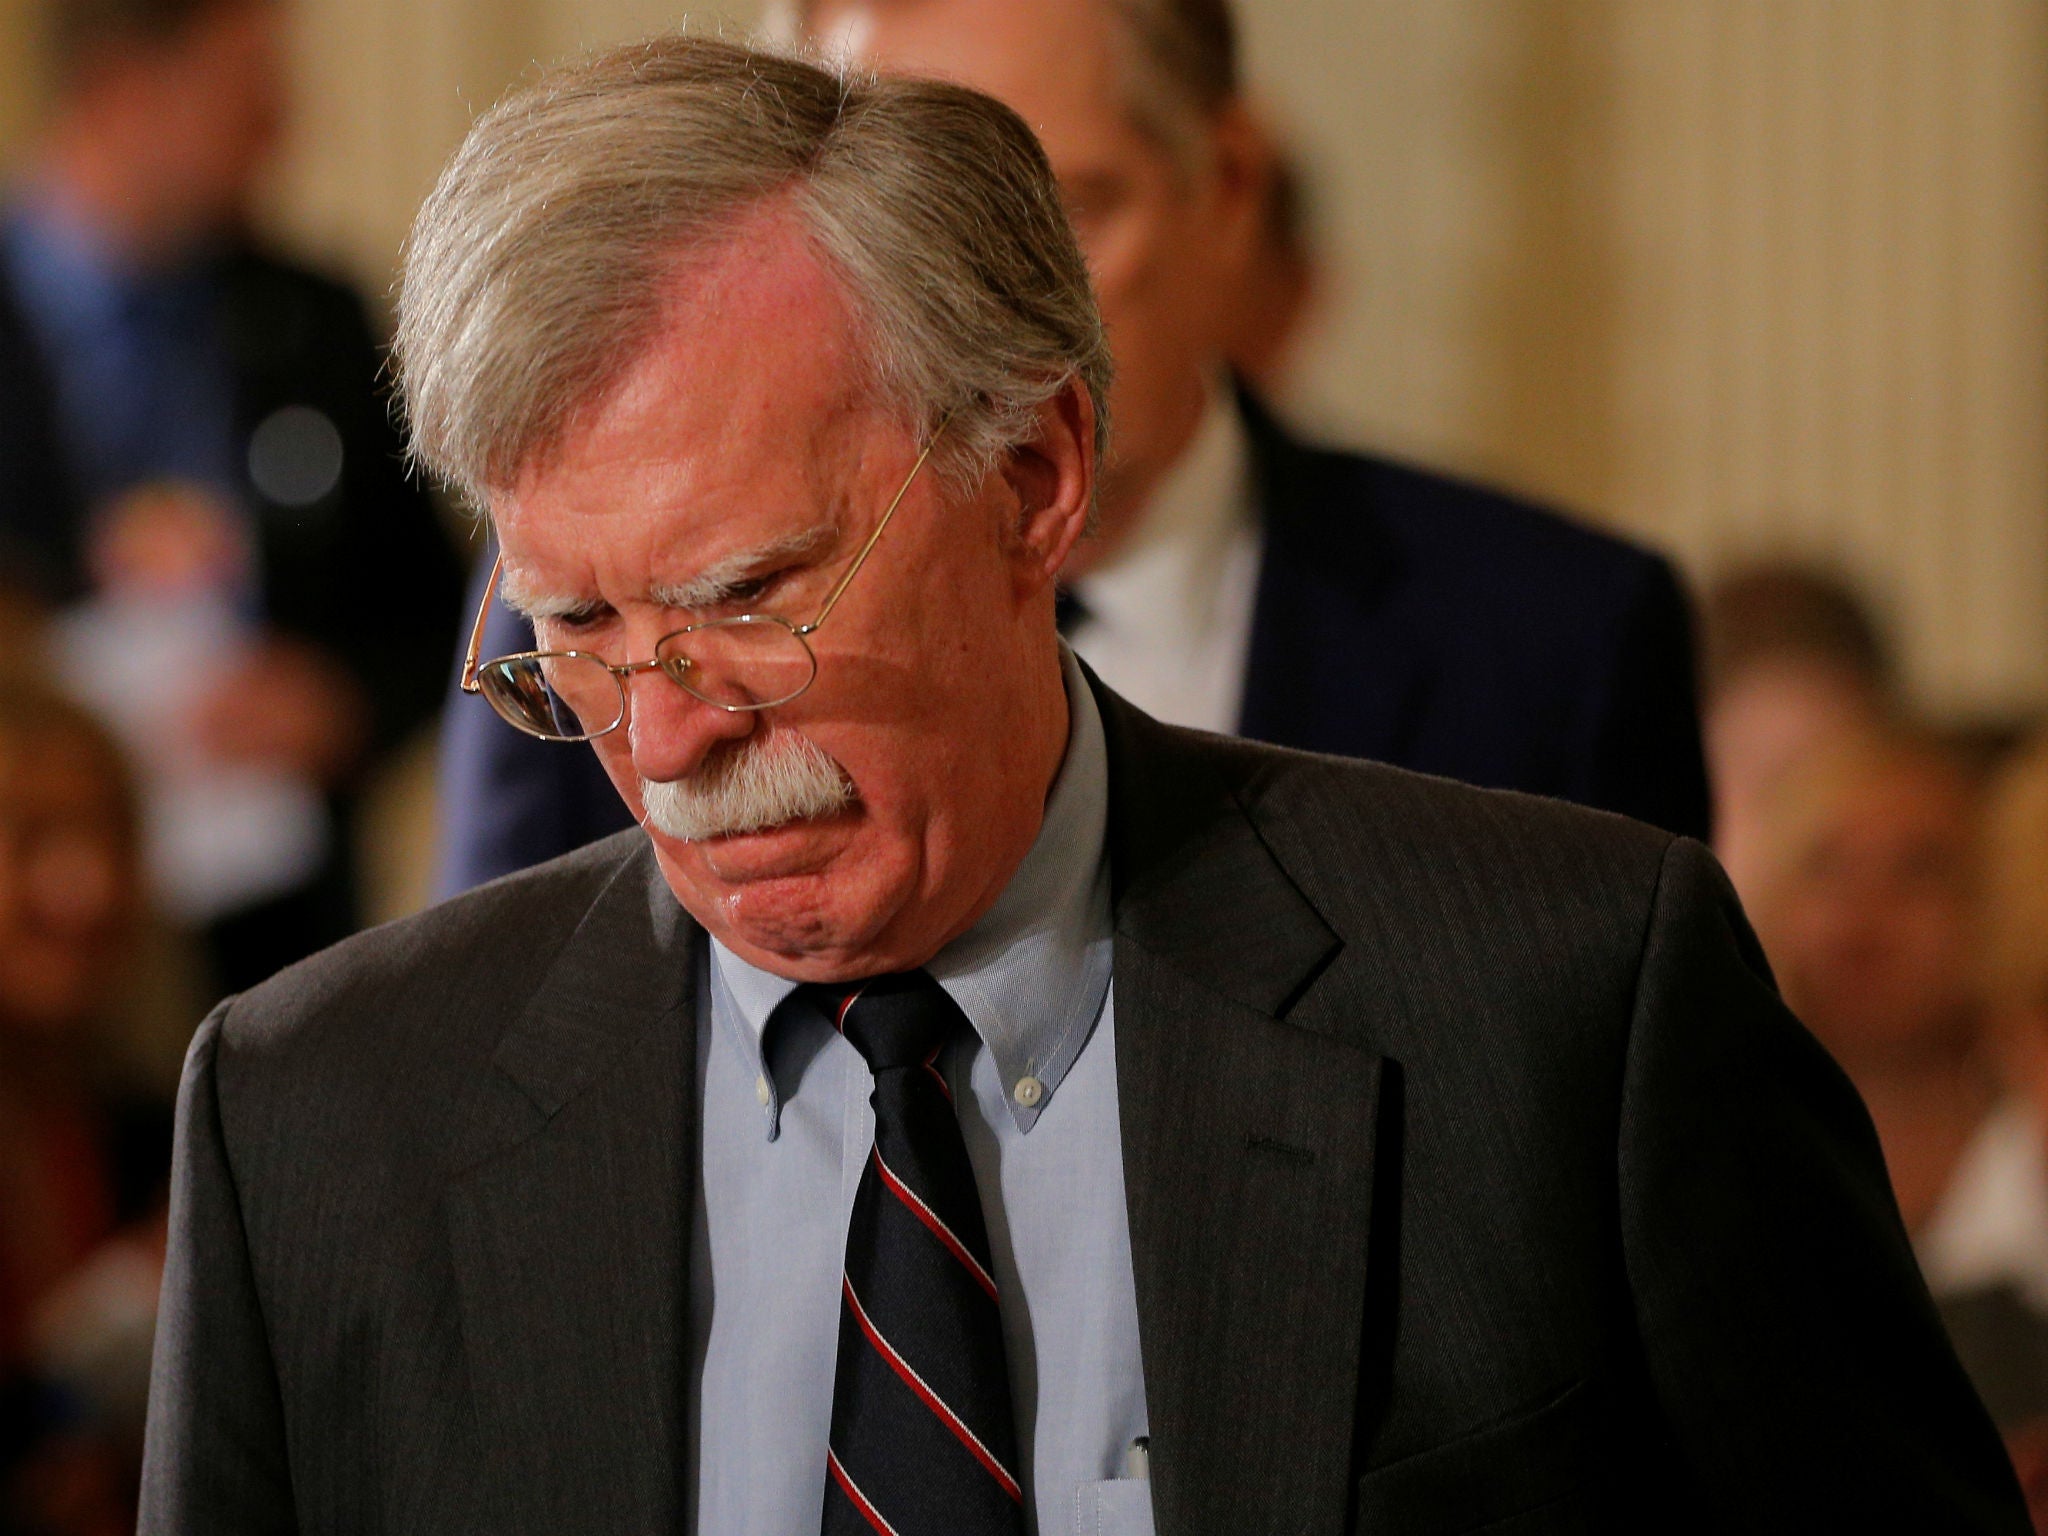 National Security Advisor John Bolton told reporters Donald Trump viewed the Iran pact as 'one of the worst deals ever negotiated in American diplomatic history'